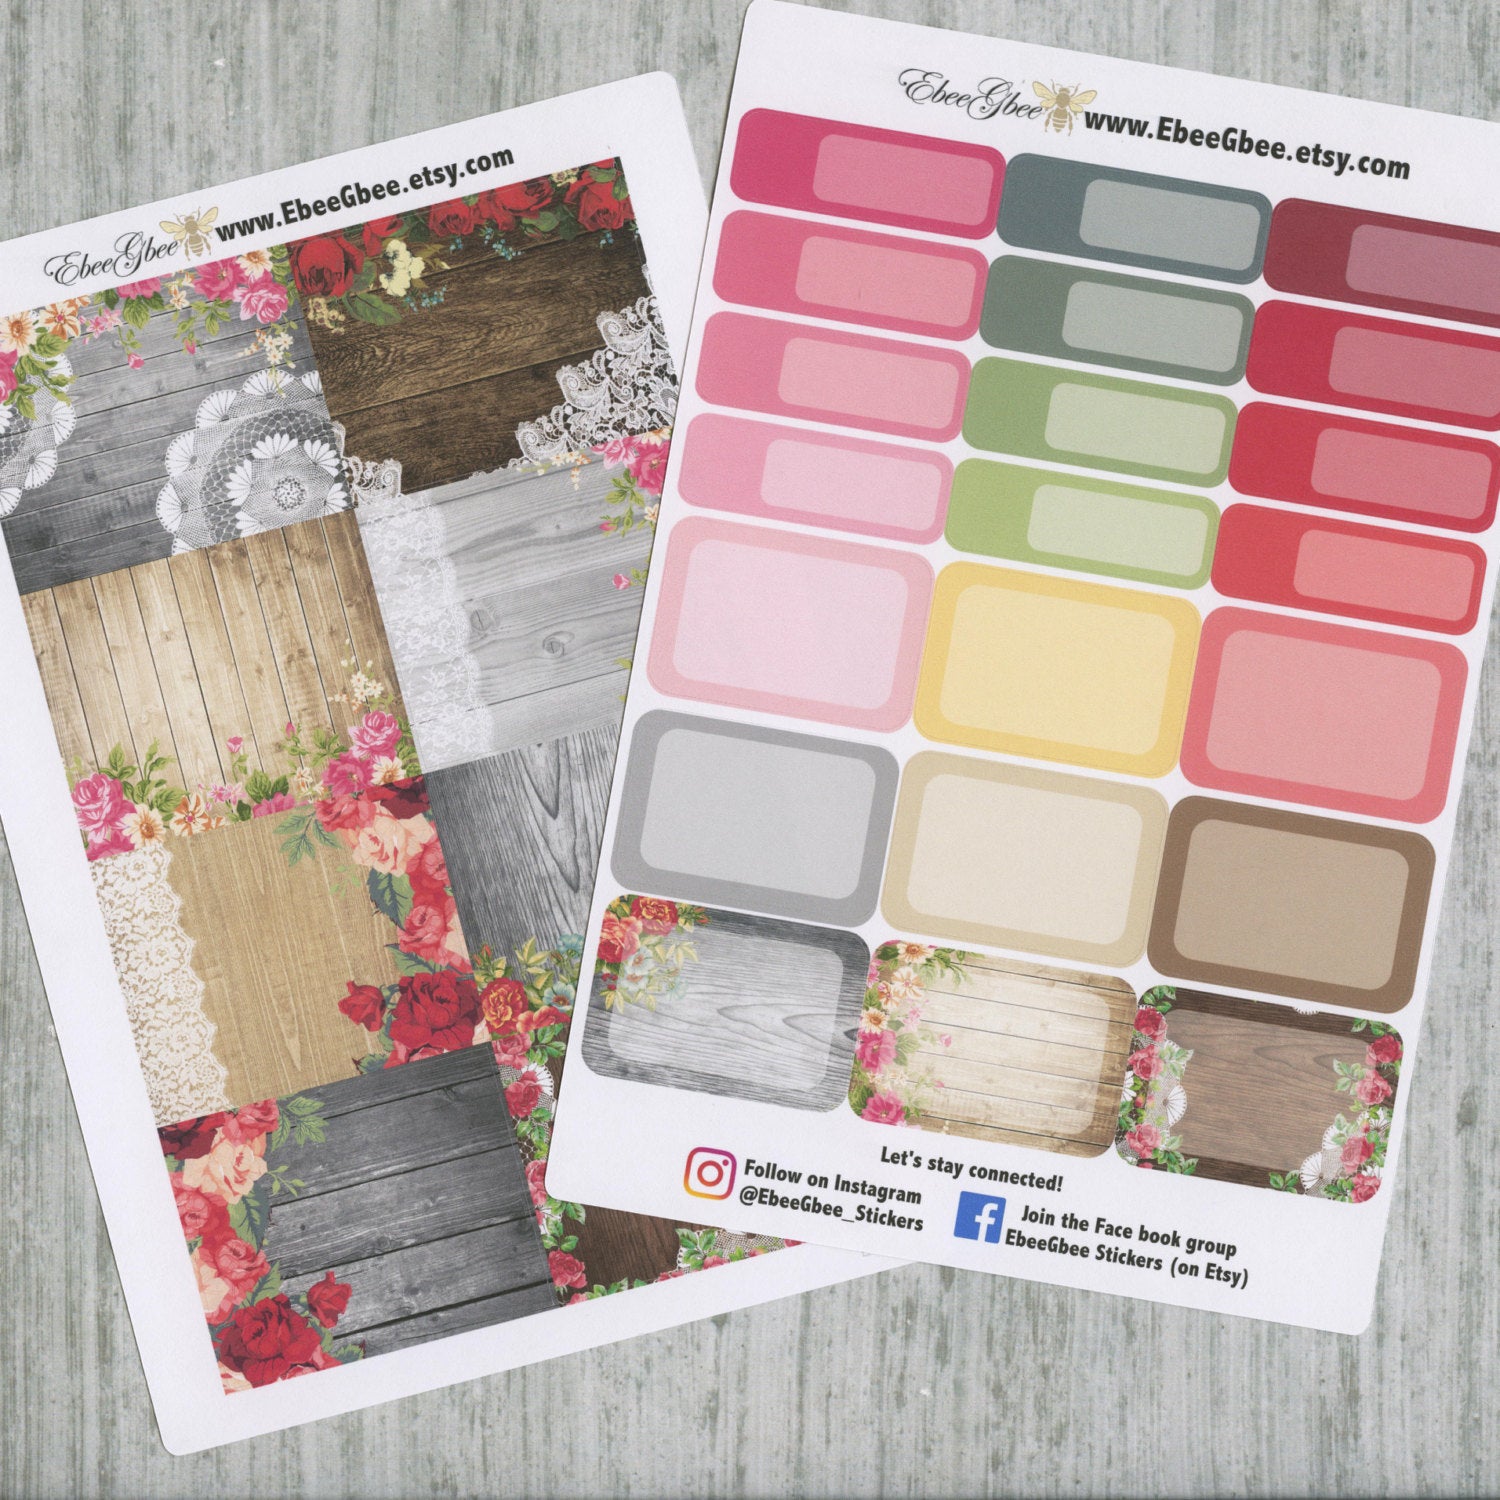 SHABBY CHIC DELUXE Weekly Planner Sticker Set | Rose Gold Storm